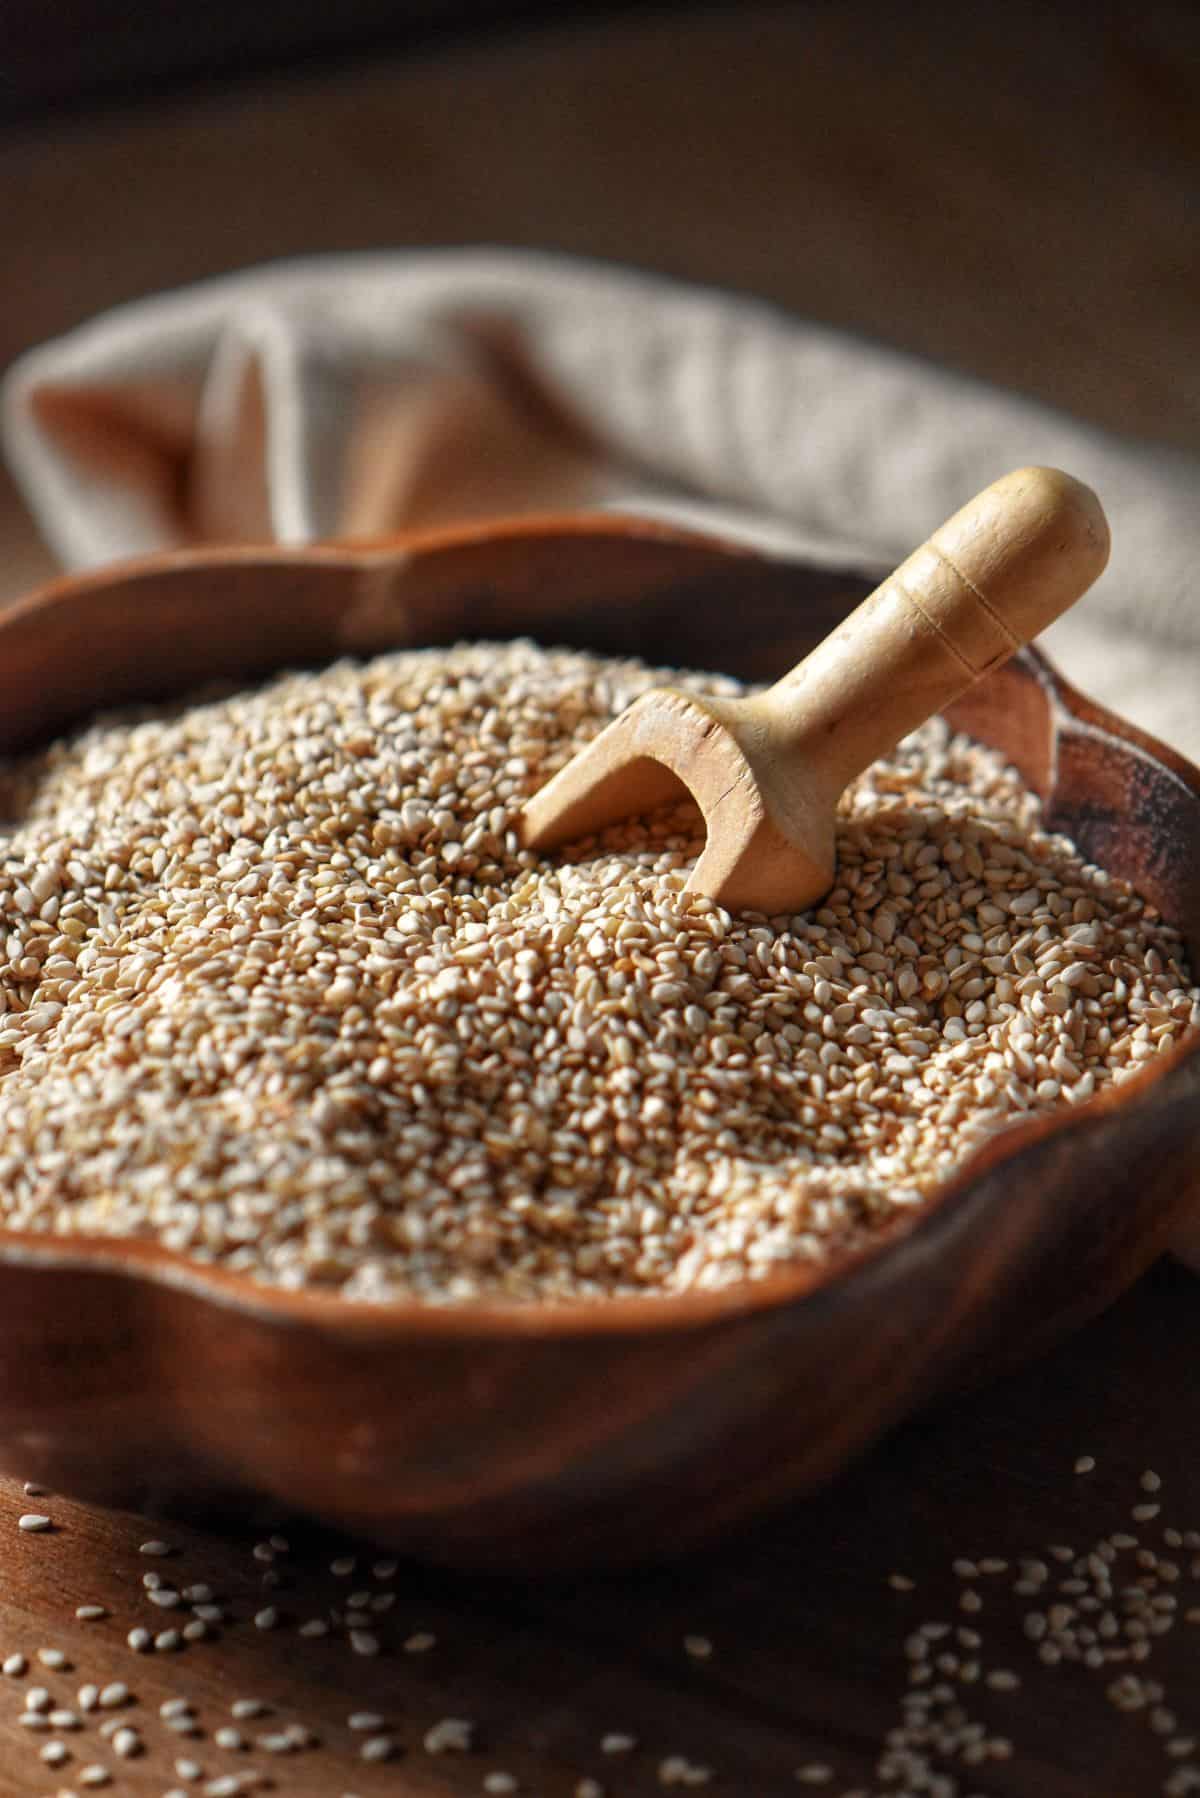 Toasted sesame seeds in a wooden bowl.